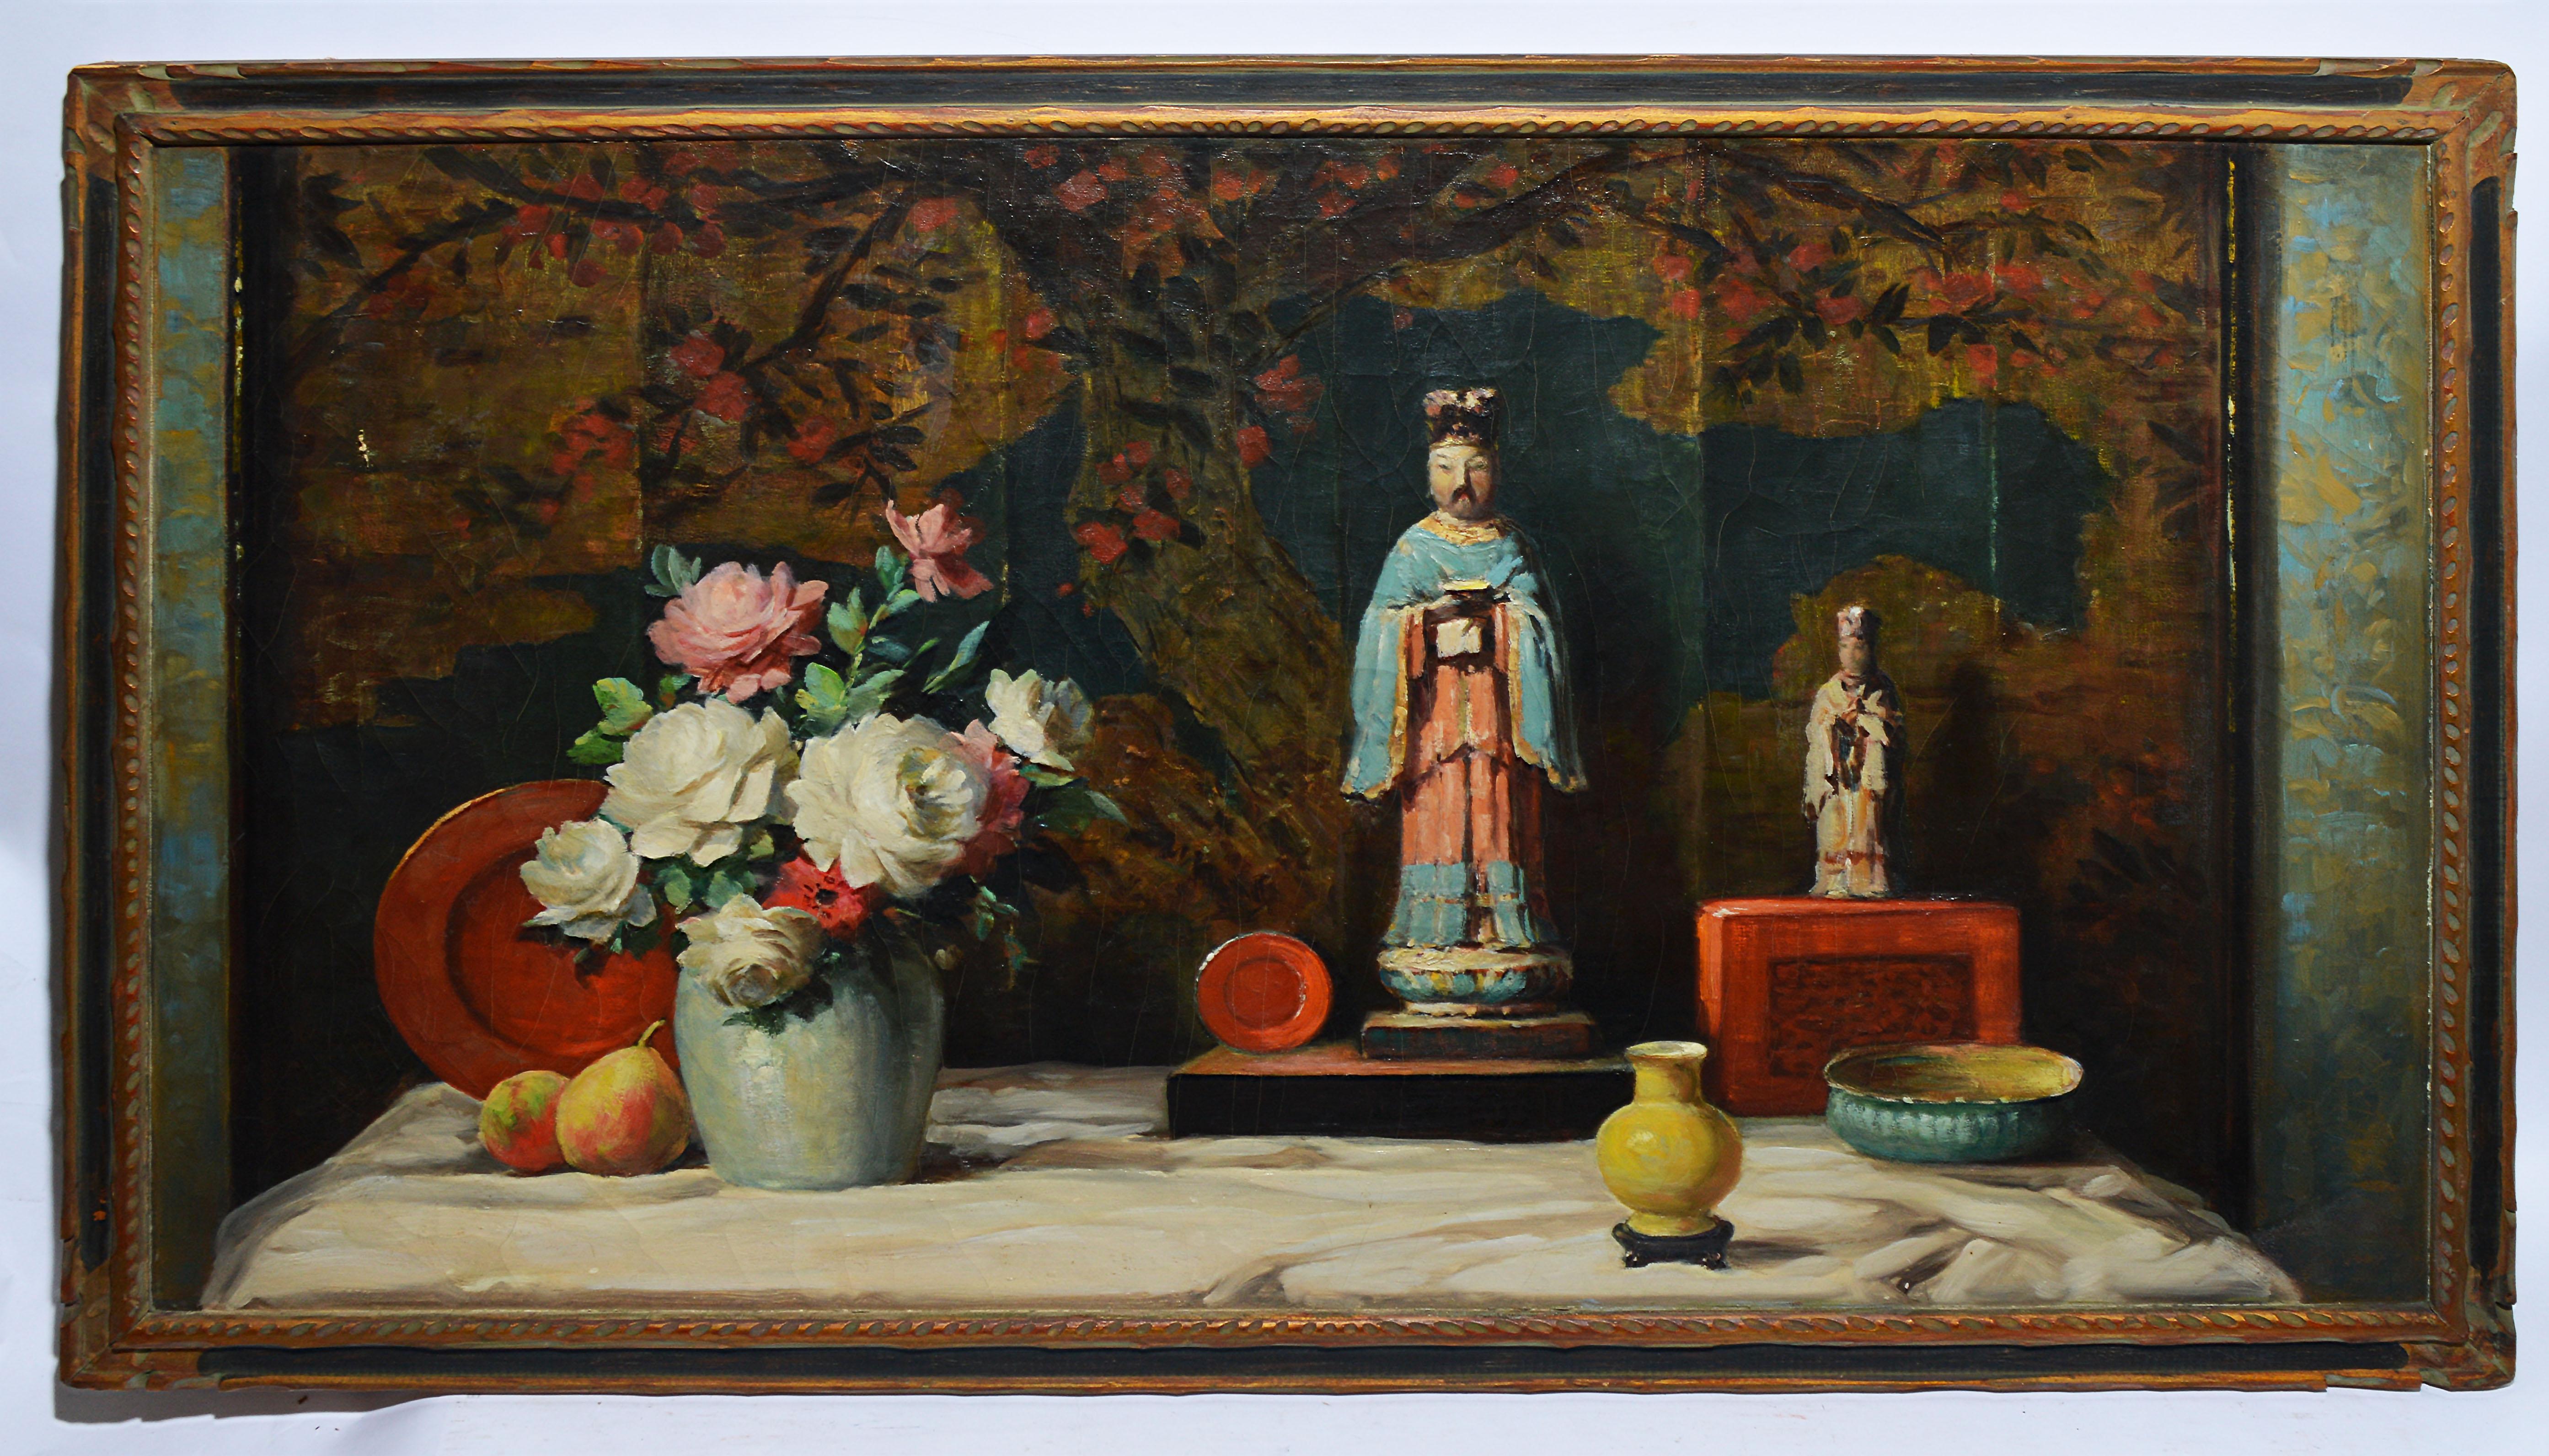 Antique still life painting by Vladimir Pavlosky  (1884 - 1944).  Oil on canvas, circa 1925.  Signed lower right.  Displayed in a giltwood frame.  Image, 42